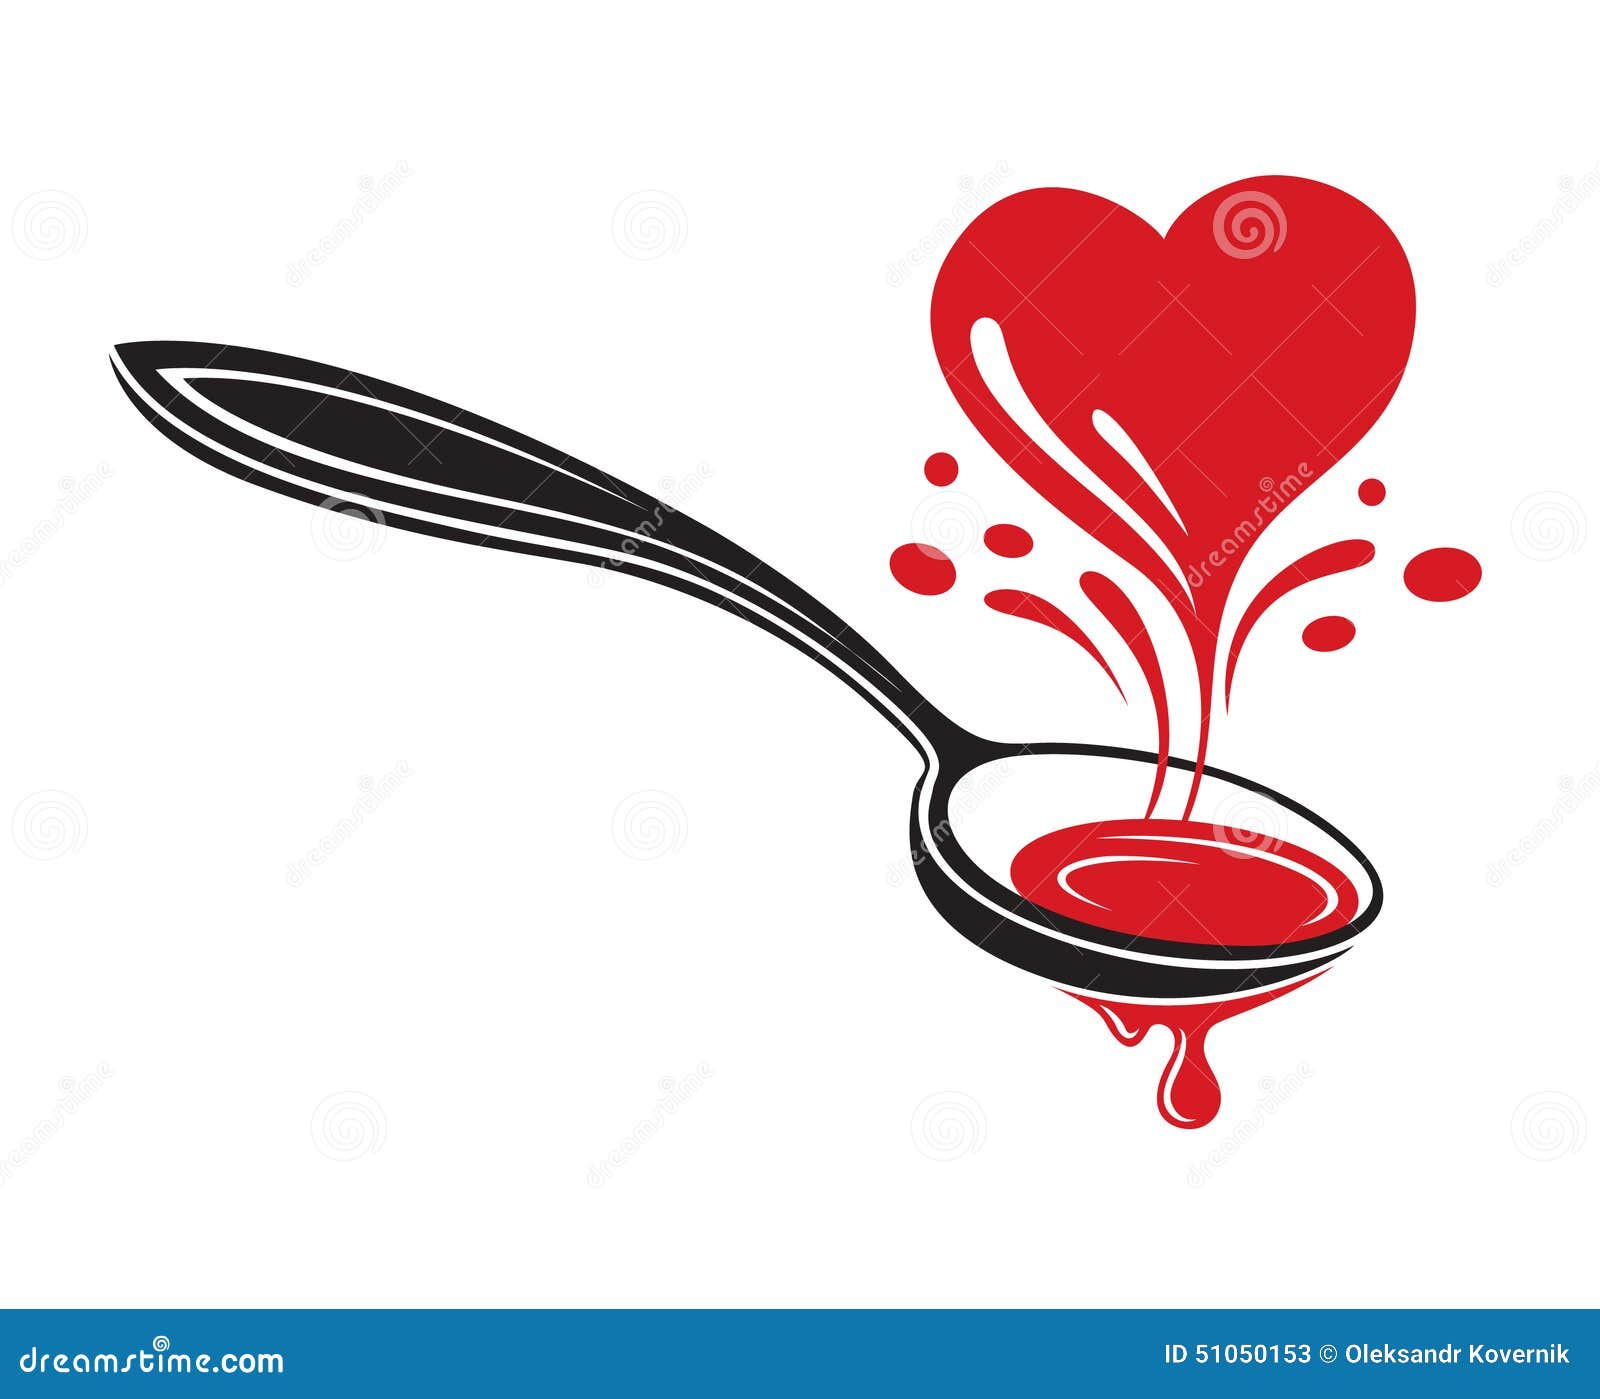 spoon and heart